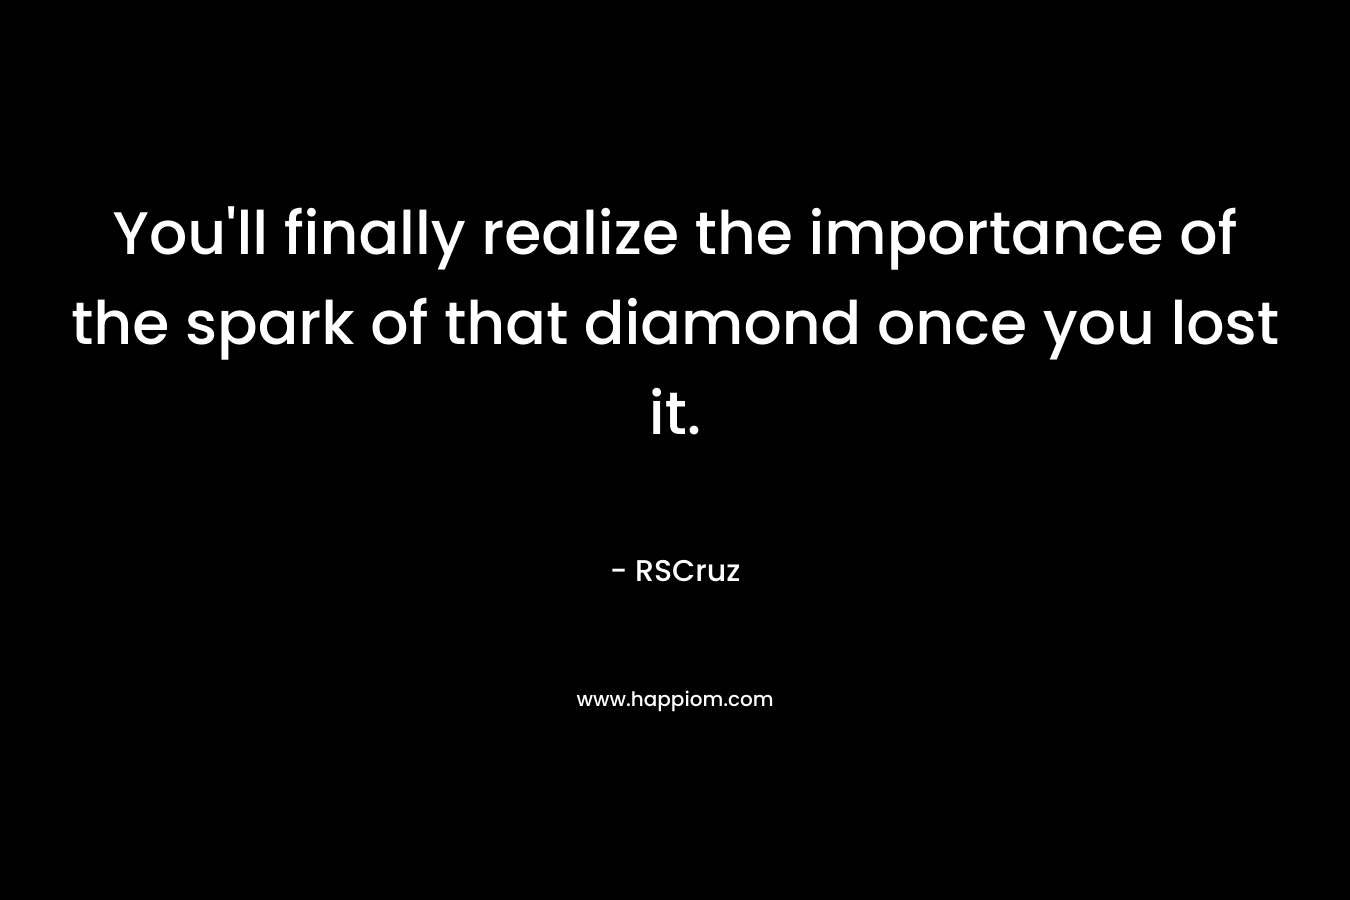 You’ll finally realize the importance of the spark of that diamond once you lost it. – RSCruz